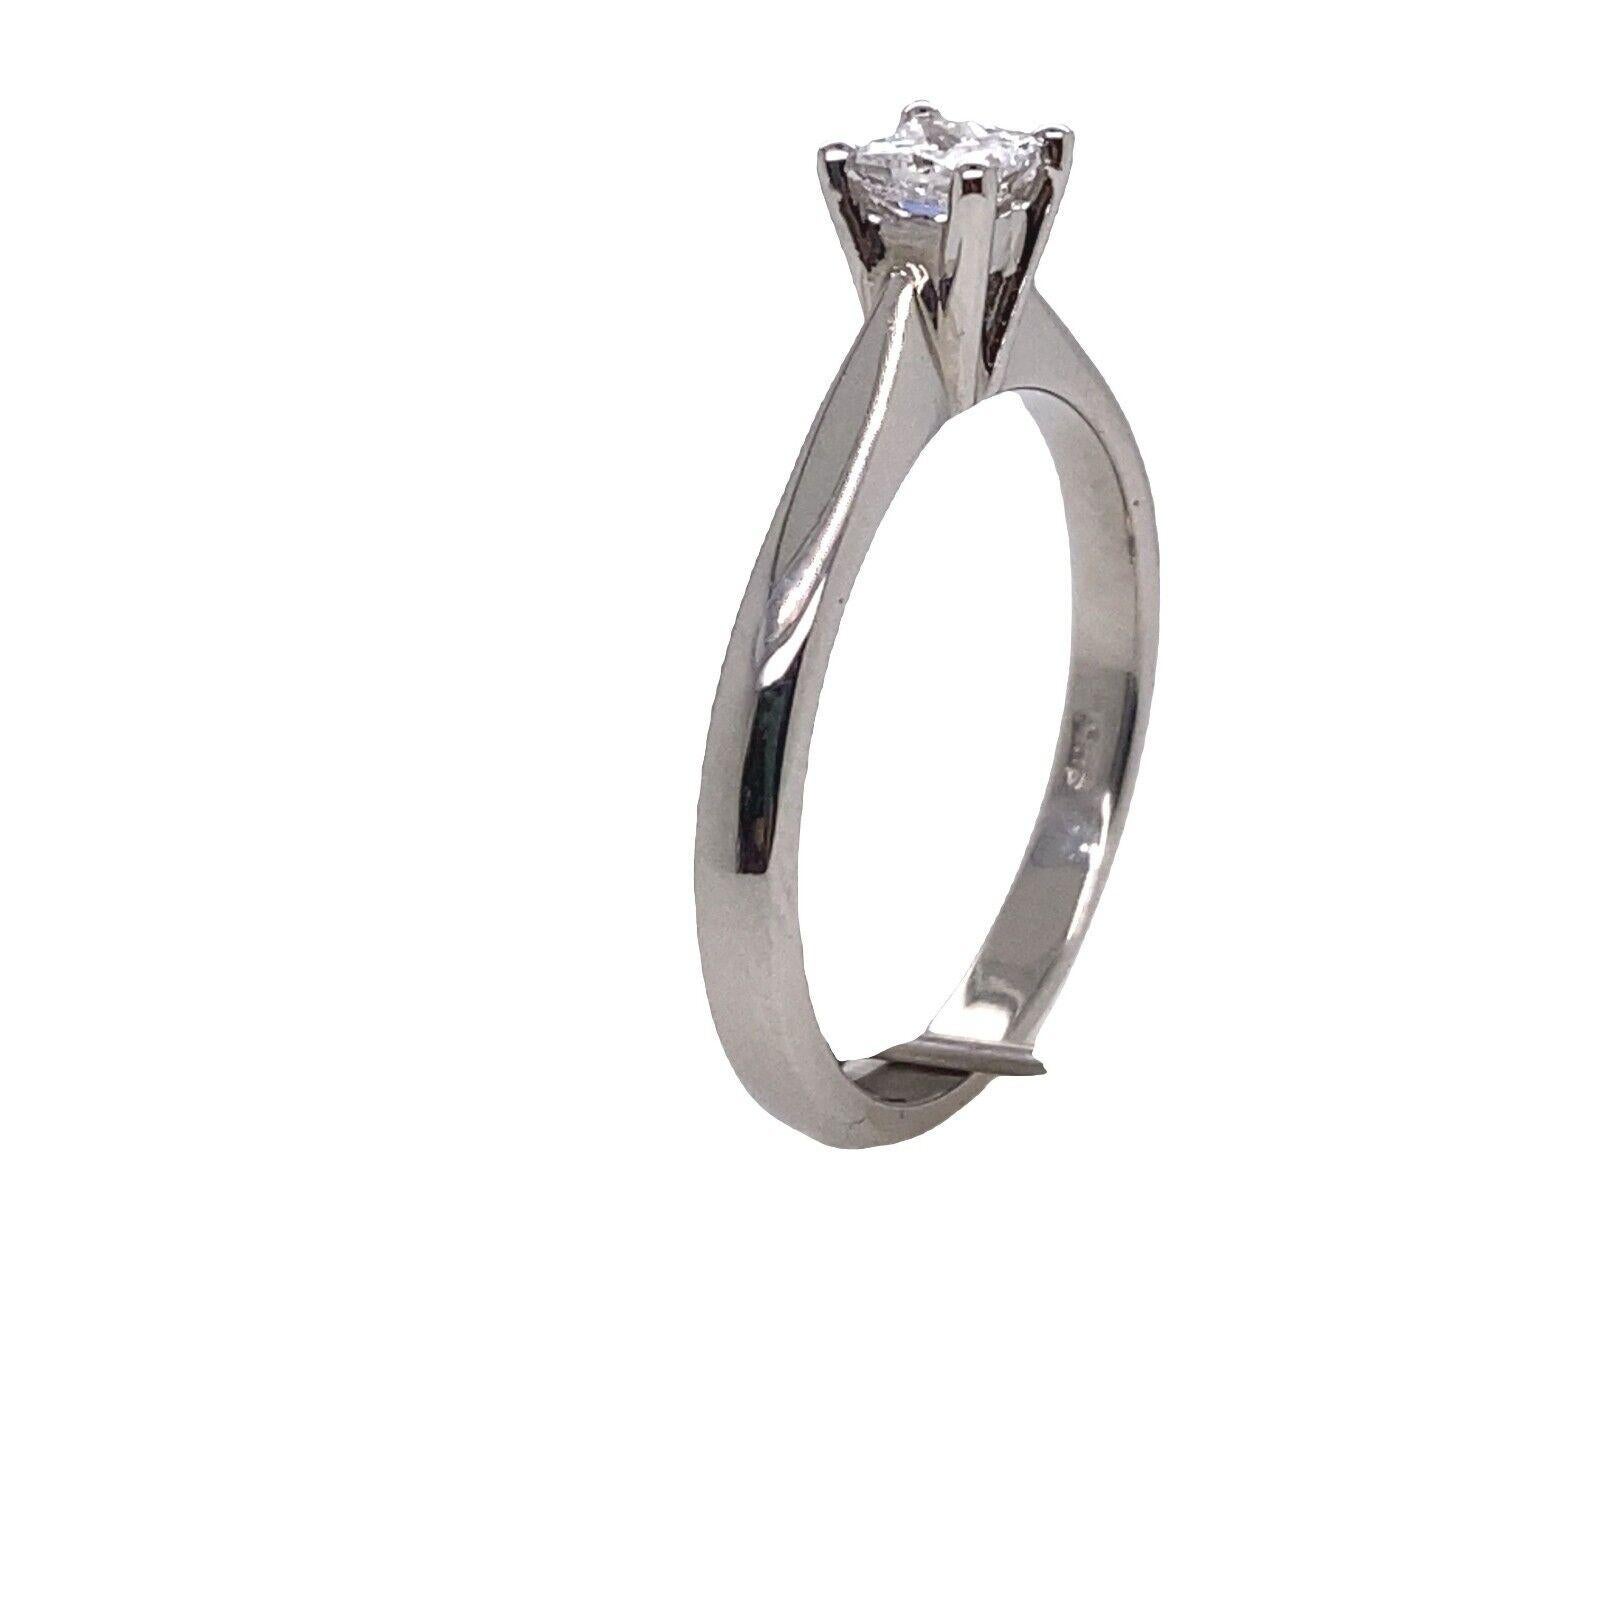 0.25ct F/VS1 Classic Princess Cut Solitaire Diamond Ring Set in Platinum In Excellent Condition For Sale In London, GB